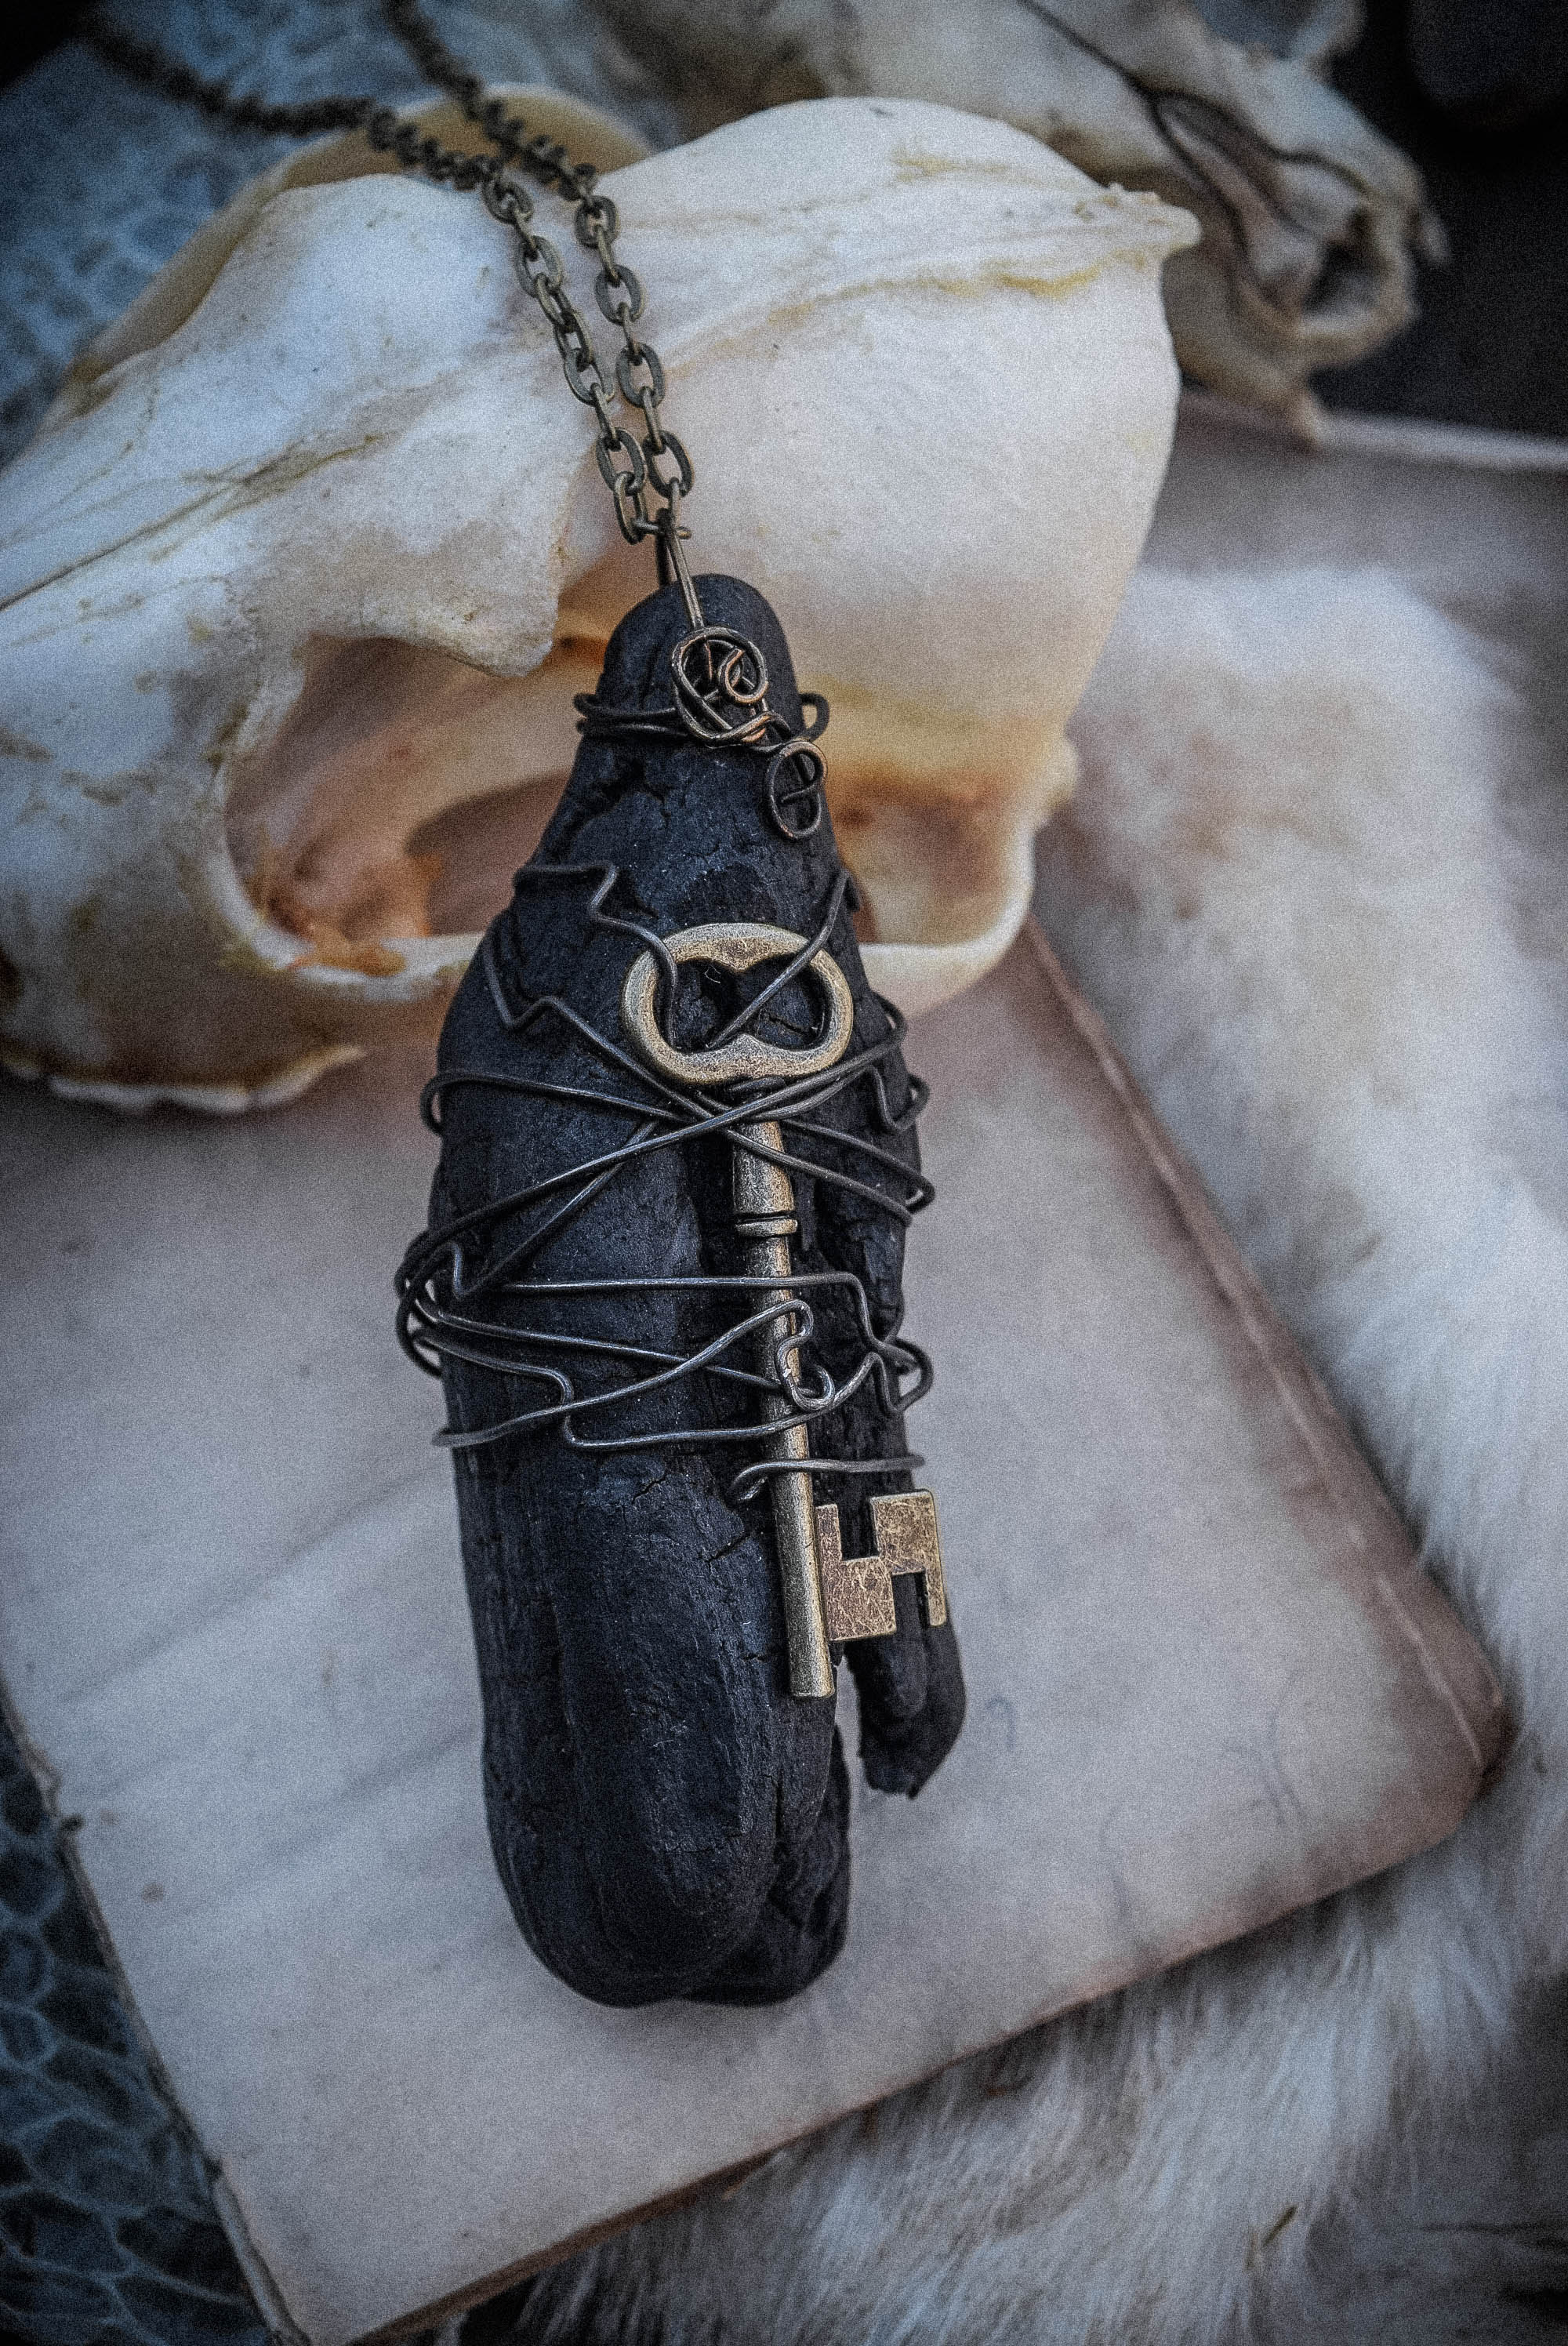 Driftwood Necklace with an Antique Style Key for Freedom and Hidden Knowledge